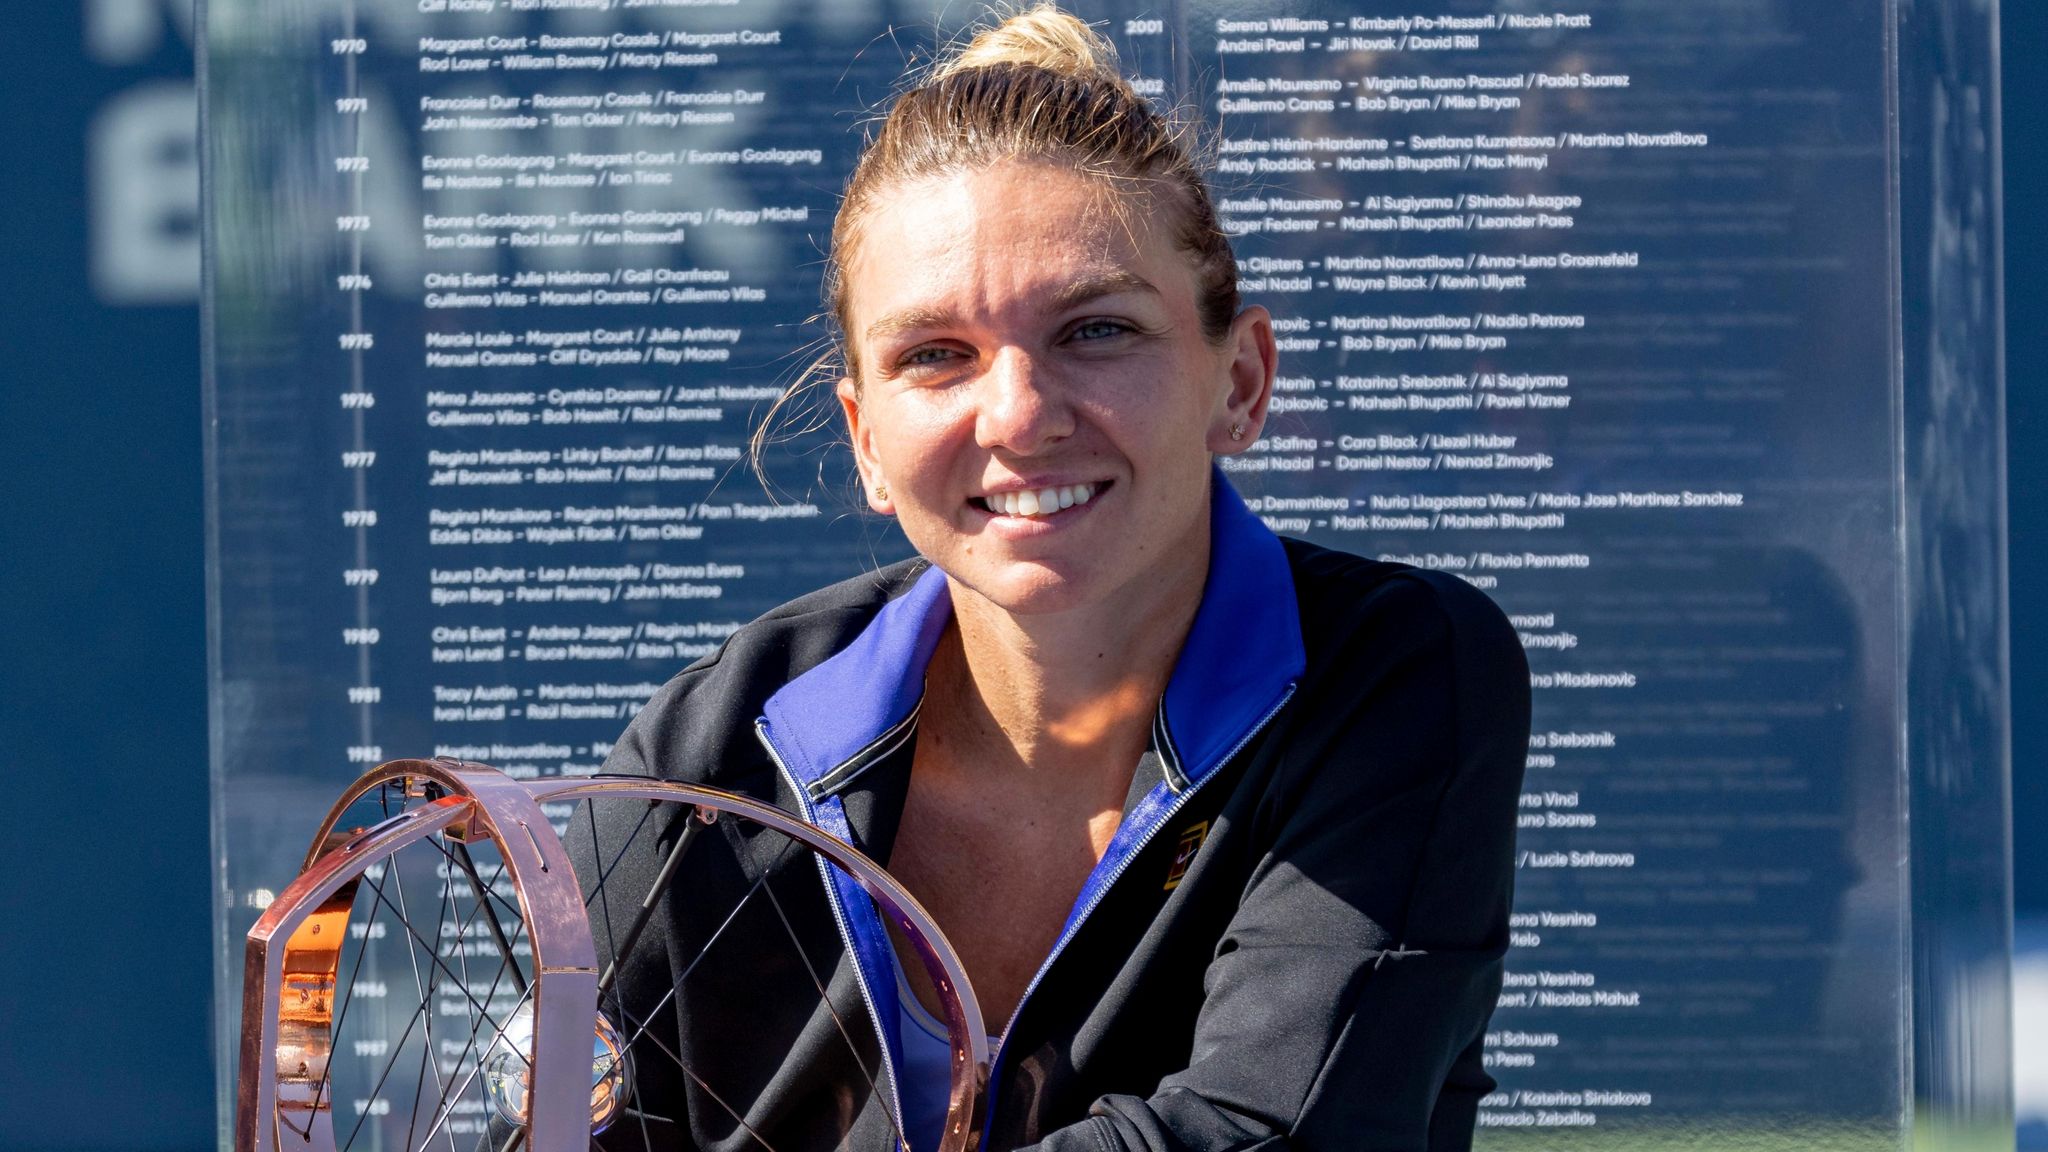 Siimona Halep beats Beatriz Haddad Maia to clinch third Canadian Open title; Pablo Carreno Busta wins in Montreal Tennis News Sky Sports